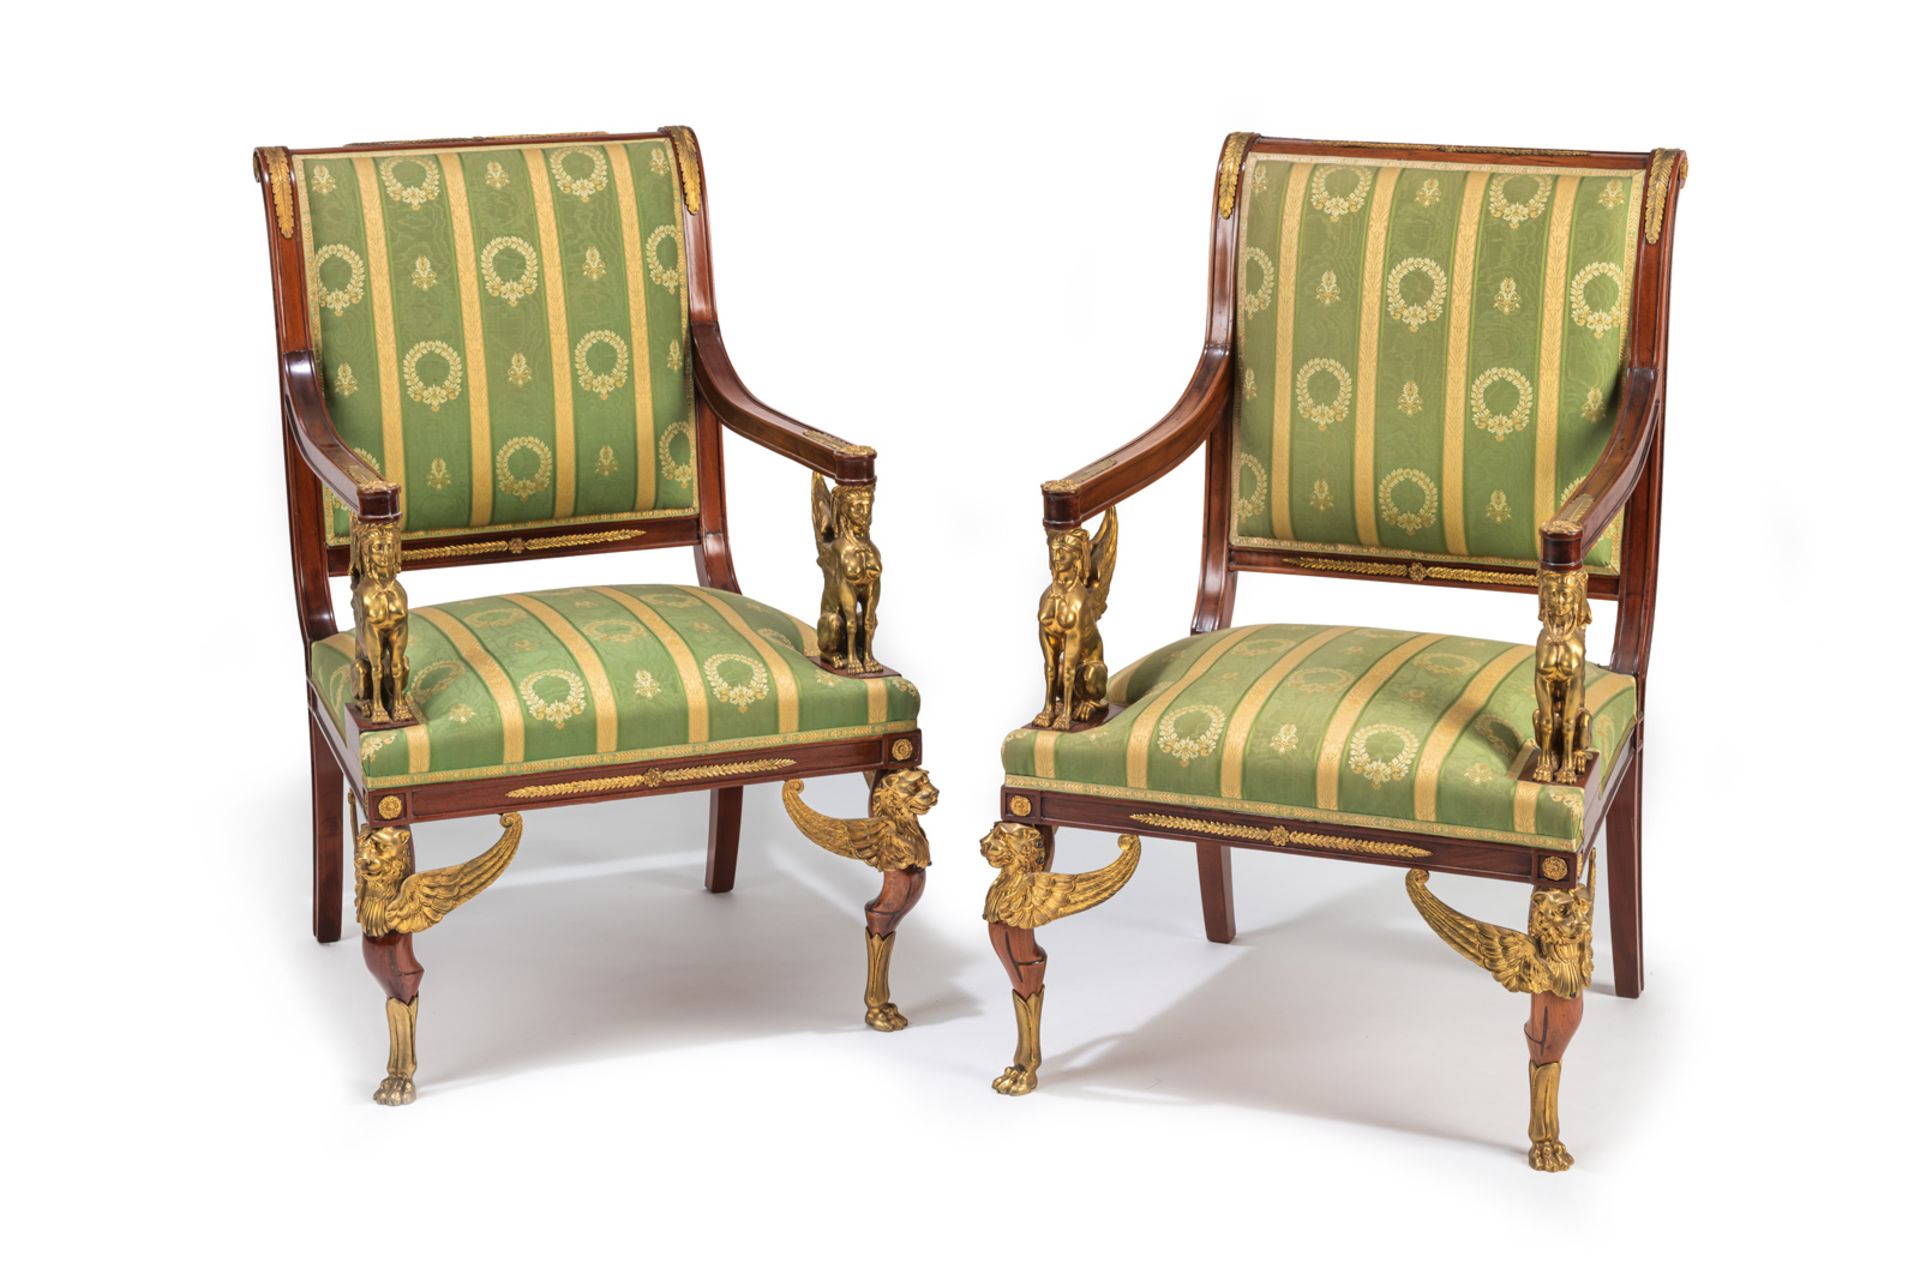 A PAIR OF NEOCLASSICAL ORMOLU MOUNTED MAHOGANY FAUTEUILS WITH SPHINX